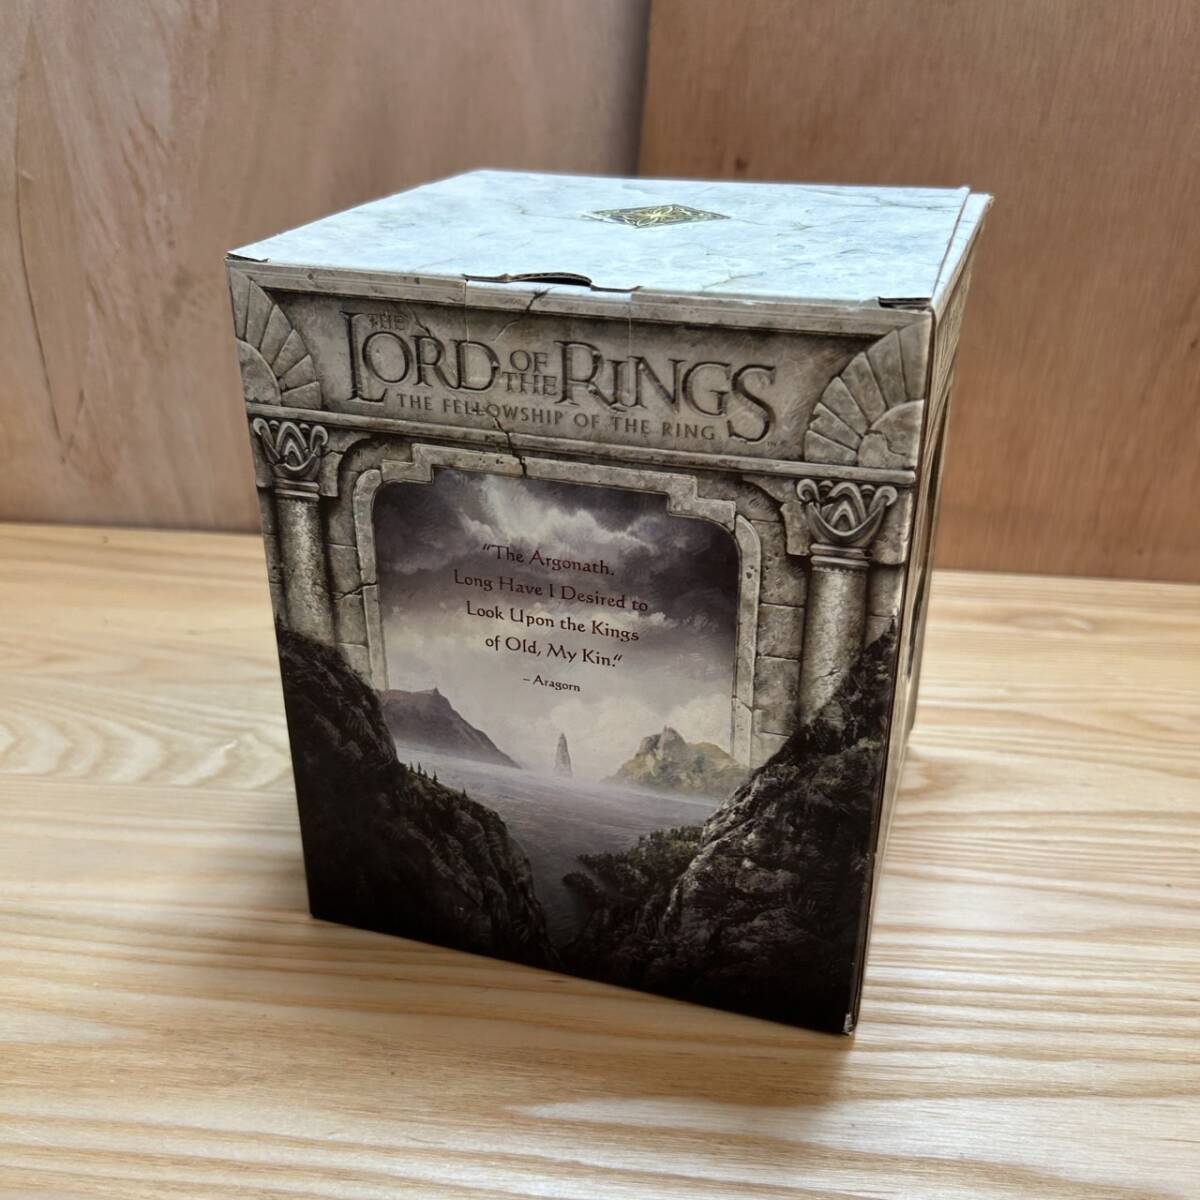 *THE Lord of THE Rings load ob The ring COLLECTOR*S DVD Gift SET collectors DVD gift set ( secondhand goods / present condition goods / storage goods )*